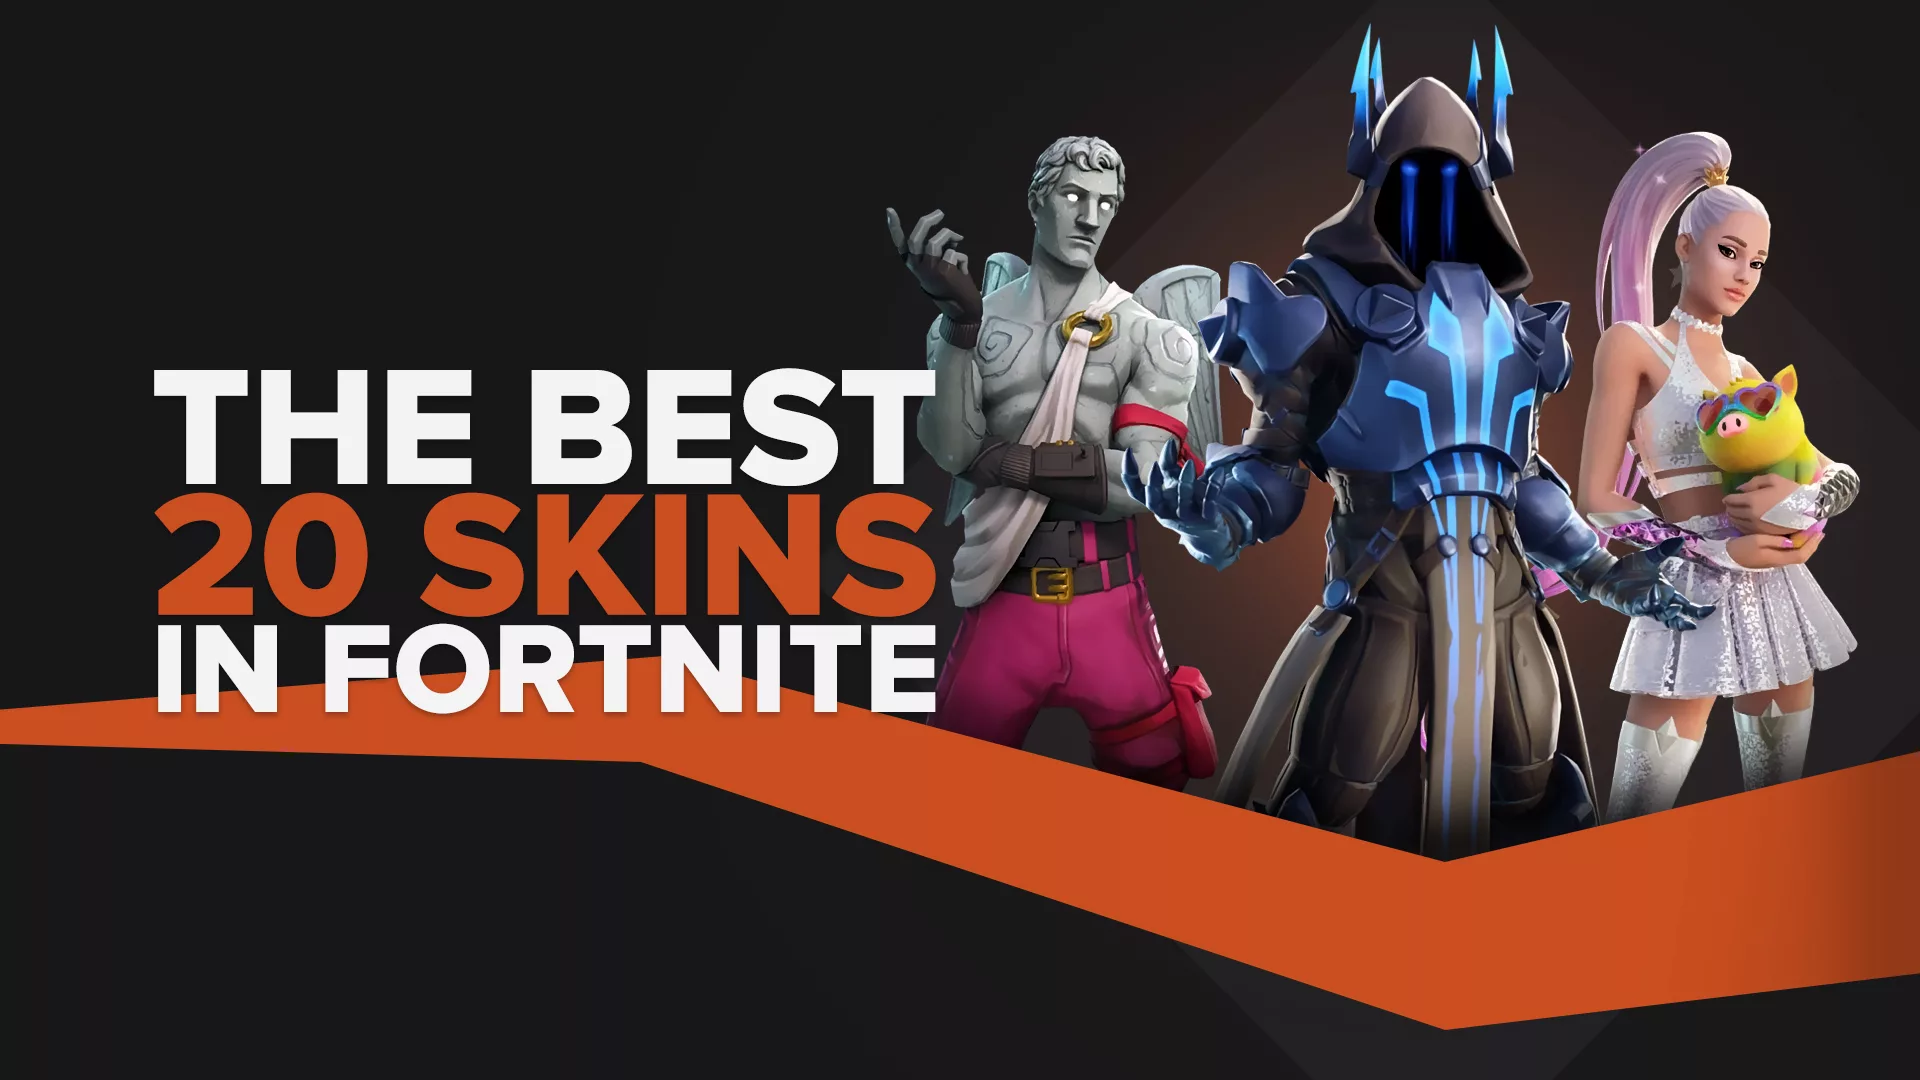 The Best Fortnite skins of all time